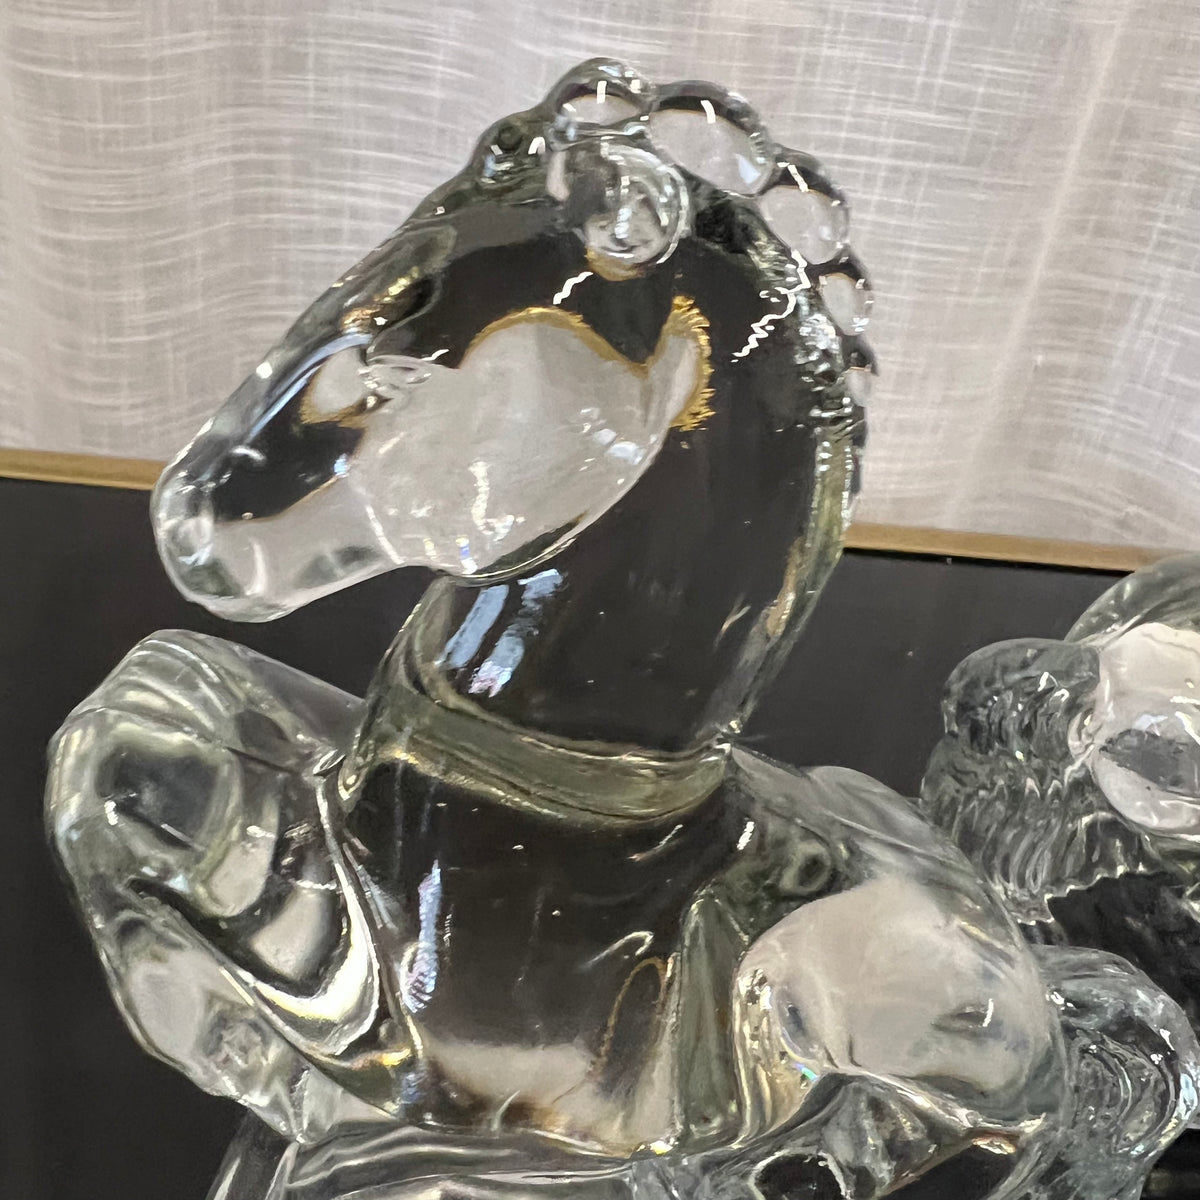 Rearing Horse bookends, Pair, Glass bookends, 1049's, LE Smith Glass, Art Deco, mid century modern, equestrian decor, timeless.  Studio Sonja Milan, Chicago, IL